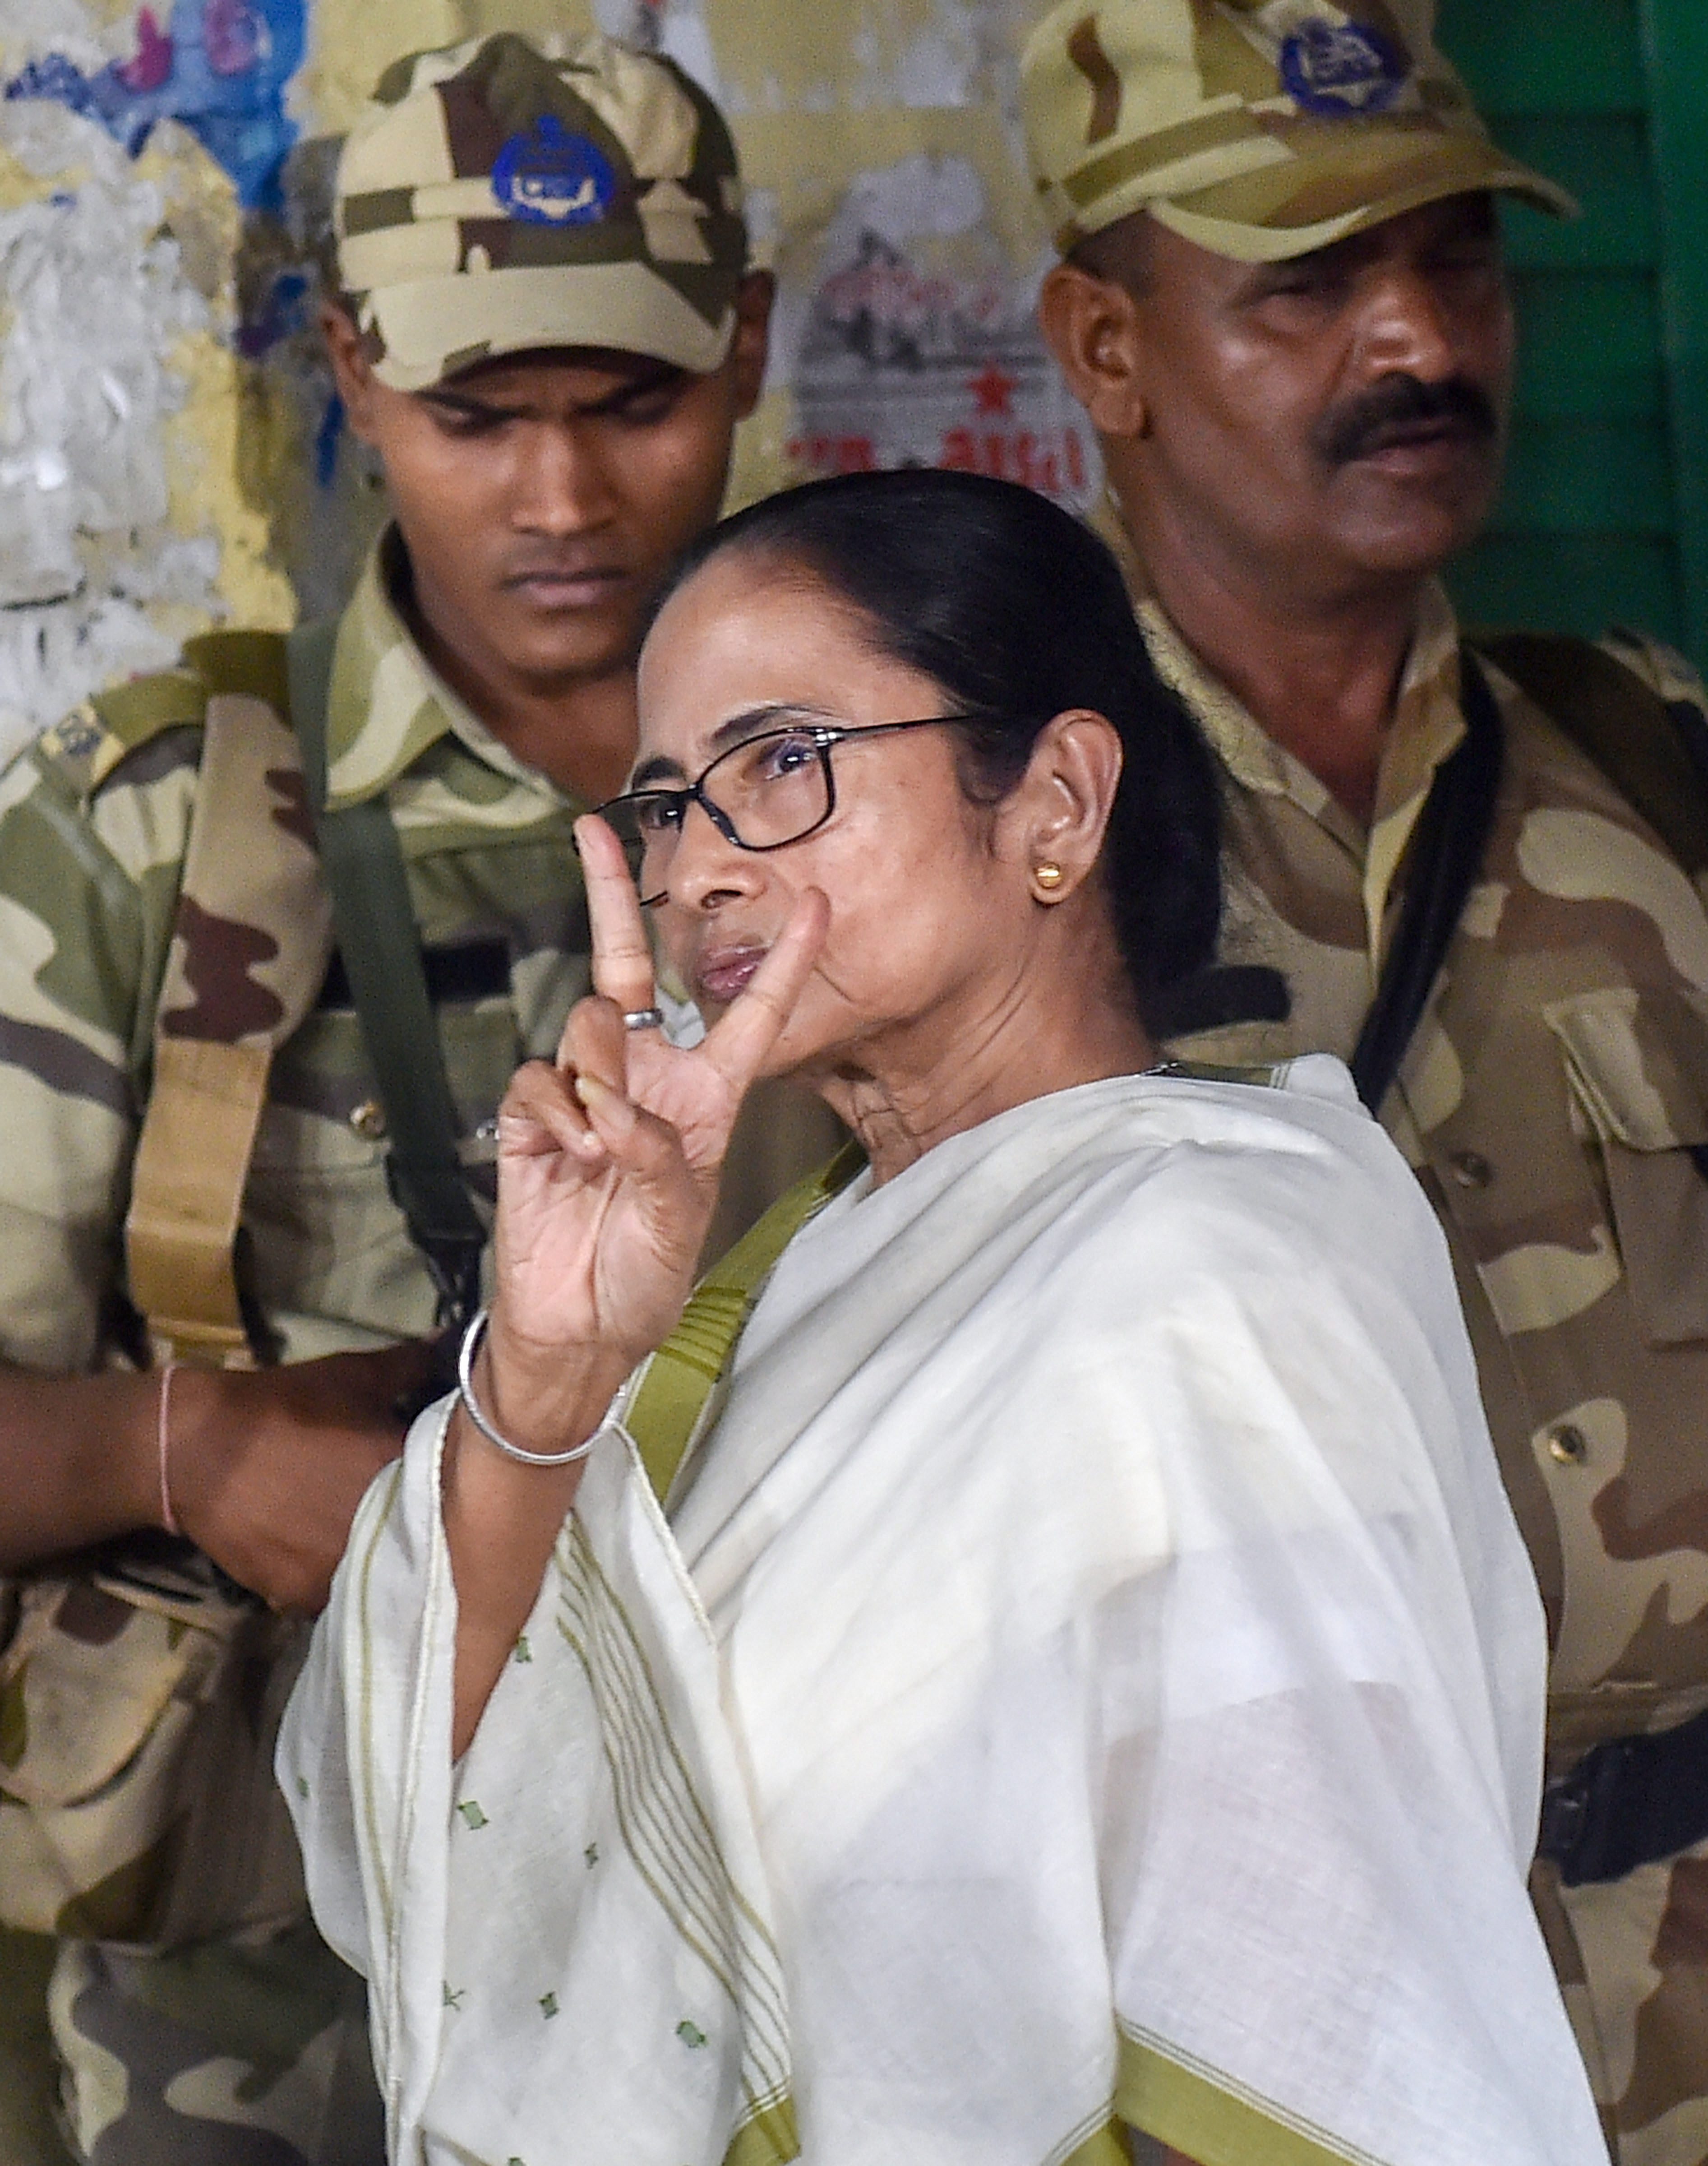 West Bengal Chief Minister and TMC Supremo Mamata Banerjee flashes victory sign after casting her vote at a polling booth during the seventh and final phase of Lok Sabha polls, in Kolkata - PTI